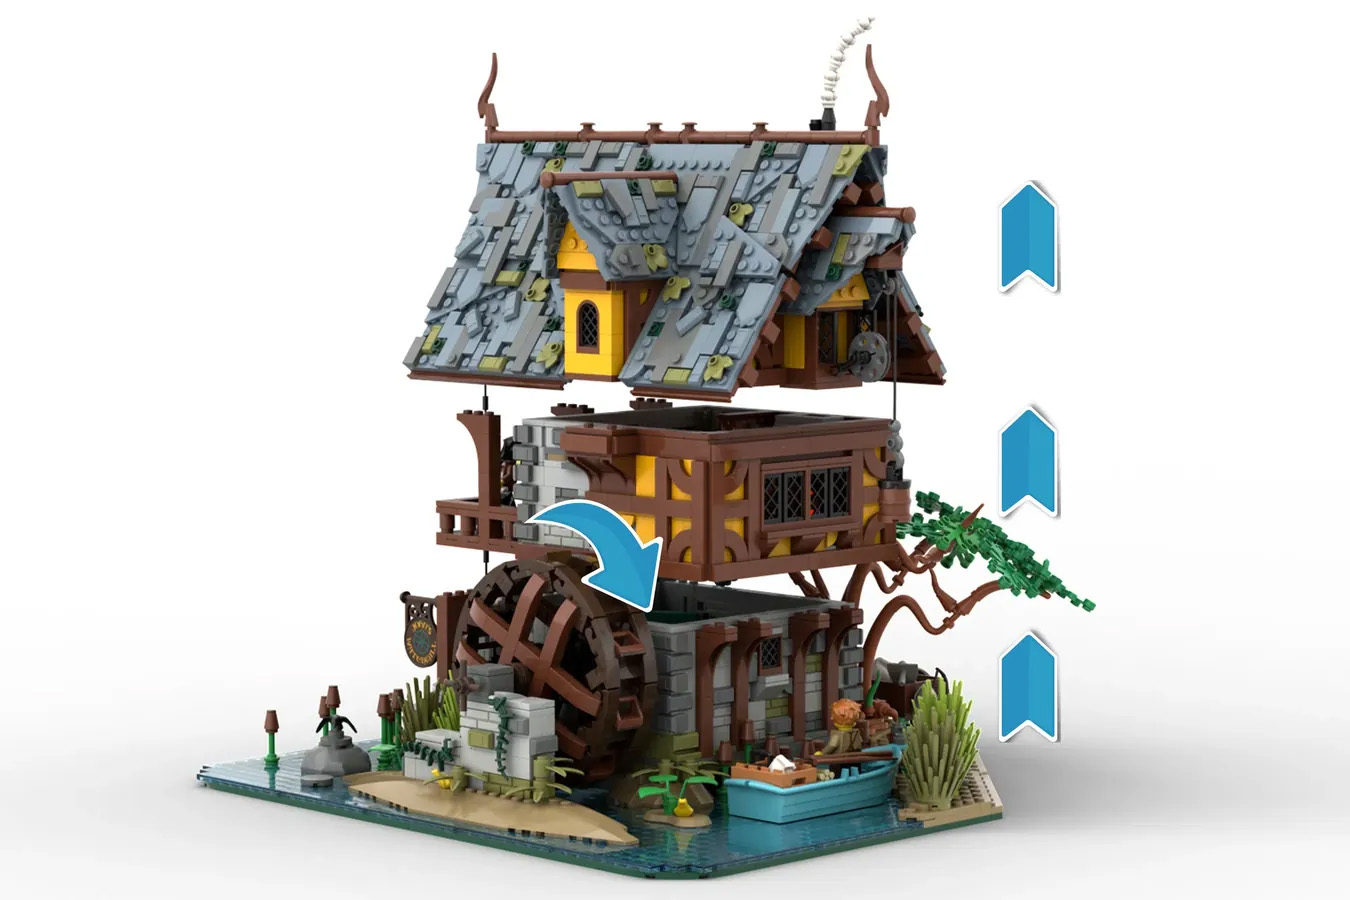 JOHN'S MEDIEVAL WATERMILL Achieves 10K Support on LEGO IDEAS